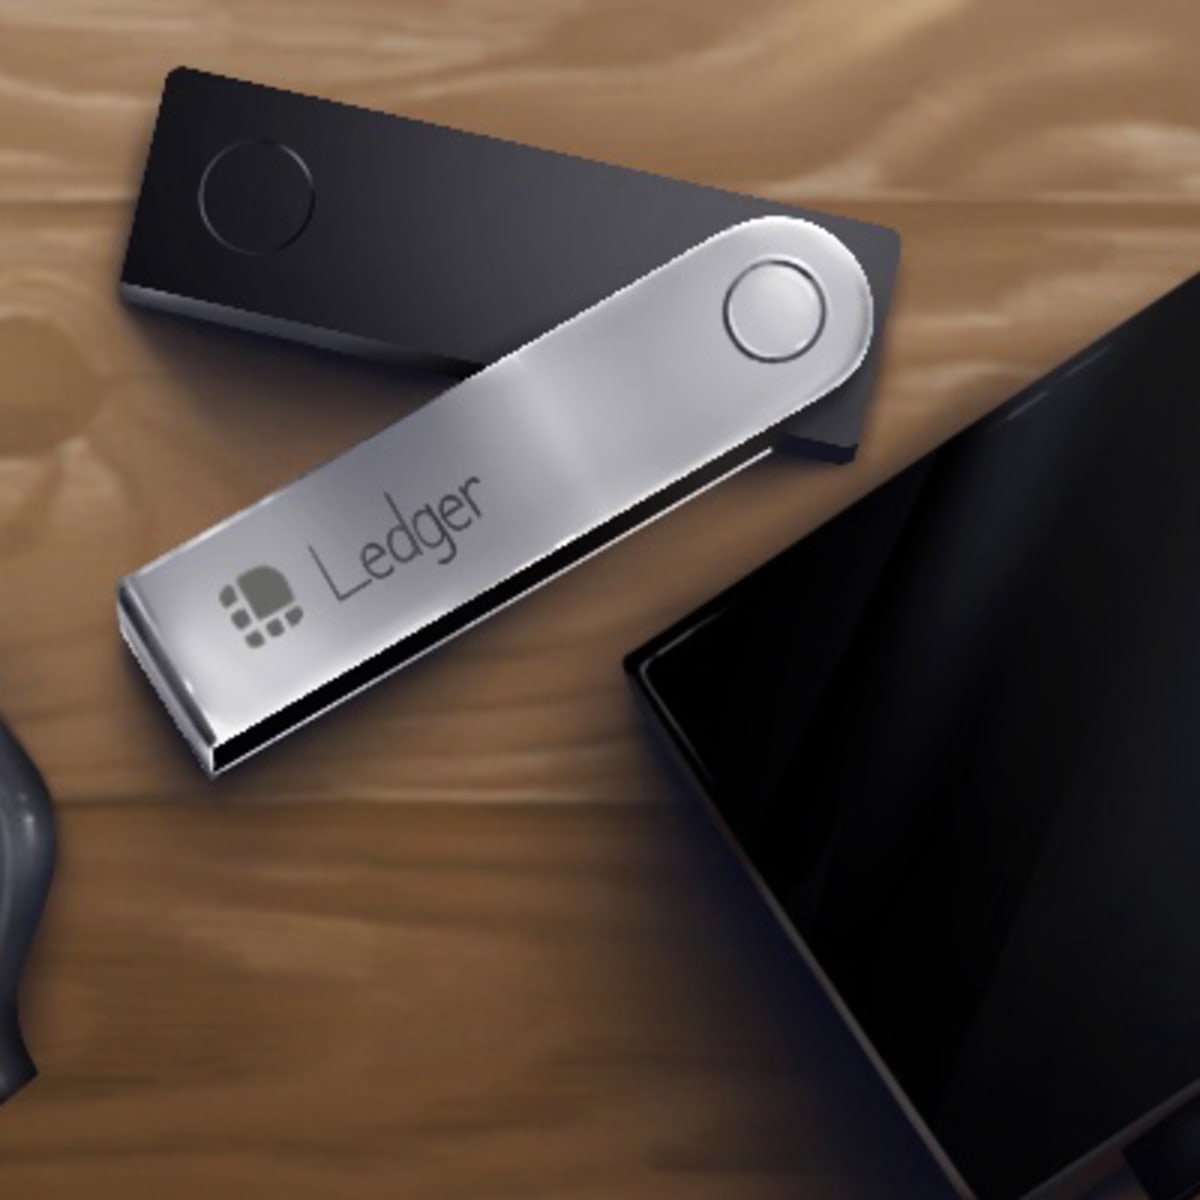 Bitcoin Wallet Reviews: The Best Hardware Wallet - Bitcoin Magazine -  Bitcoin News, Articles and Expert Insights